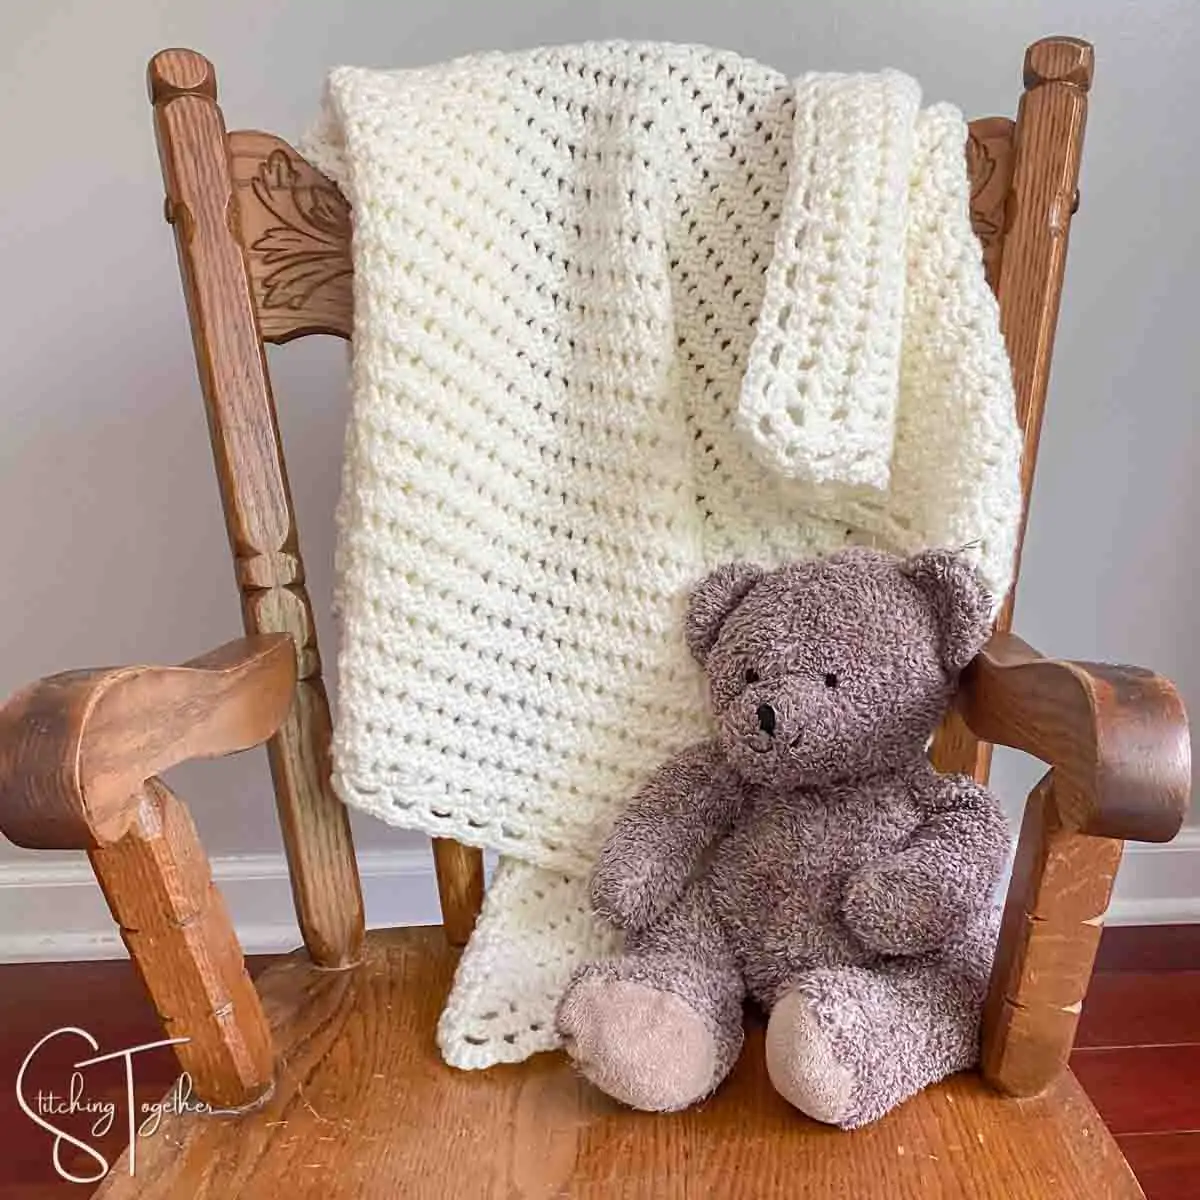 crochet lacy baby blanket draped on chair with stuffed bear next to it